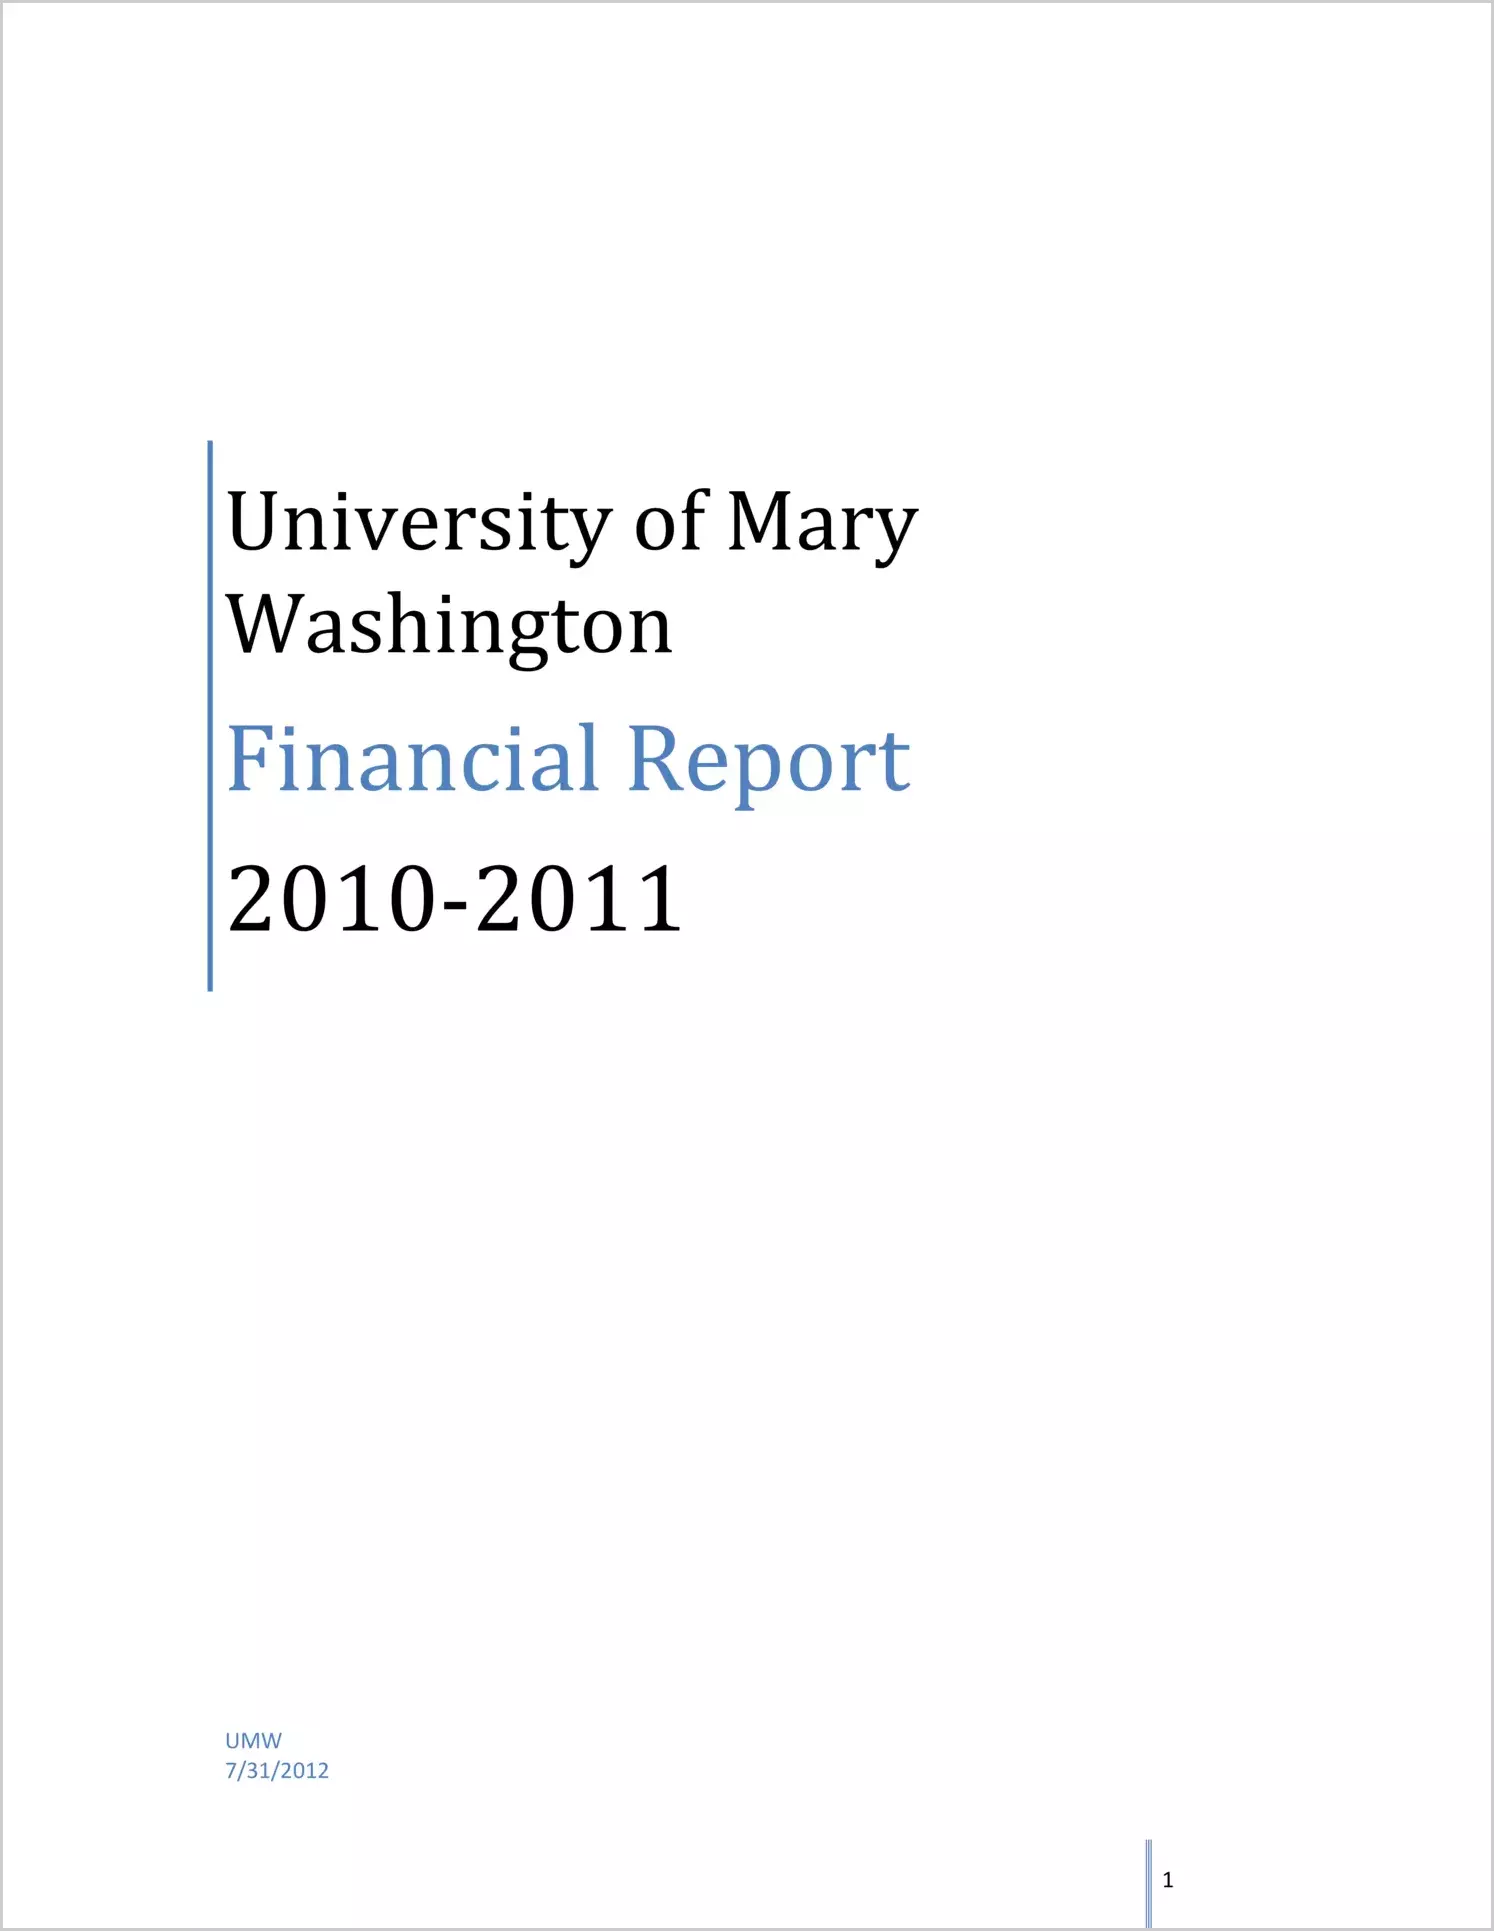 University of Mary Washington Financial Report for the year ended June 30, 2011